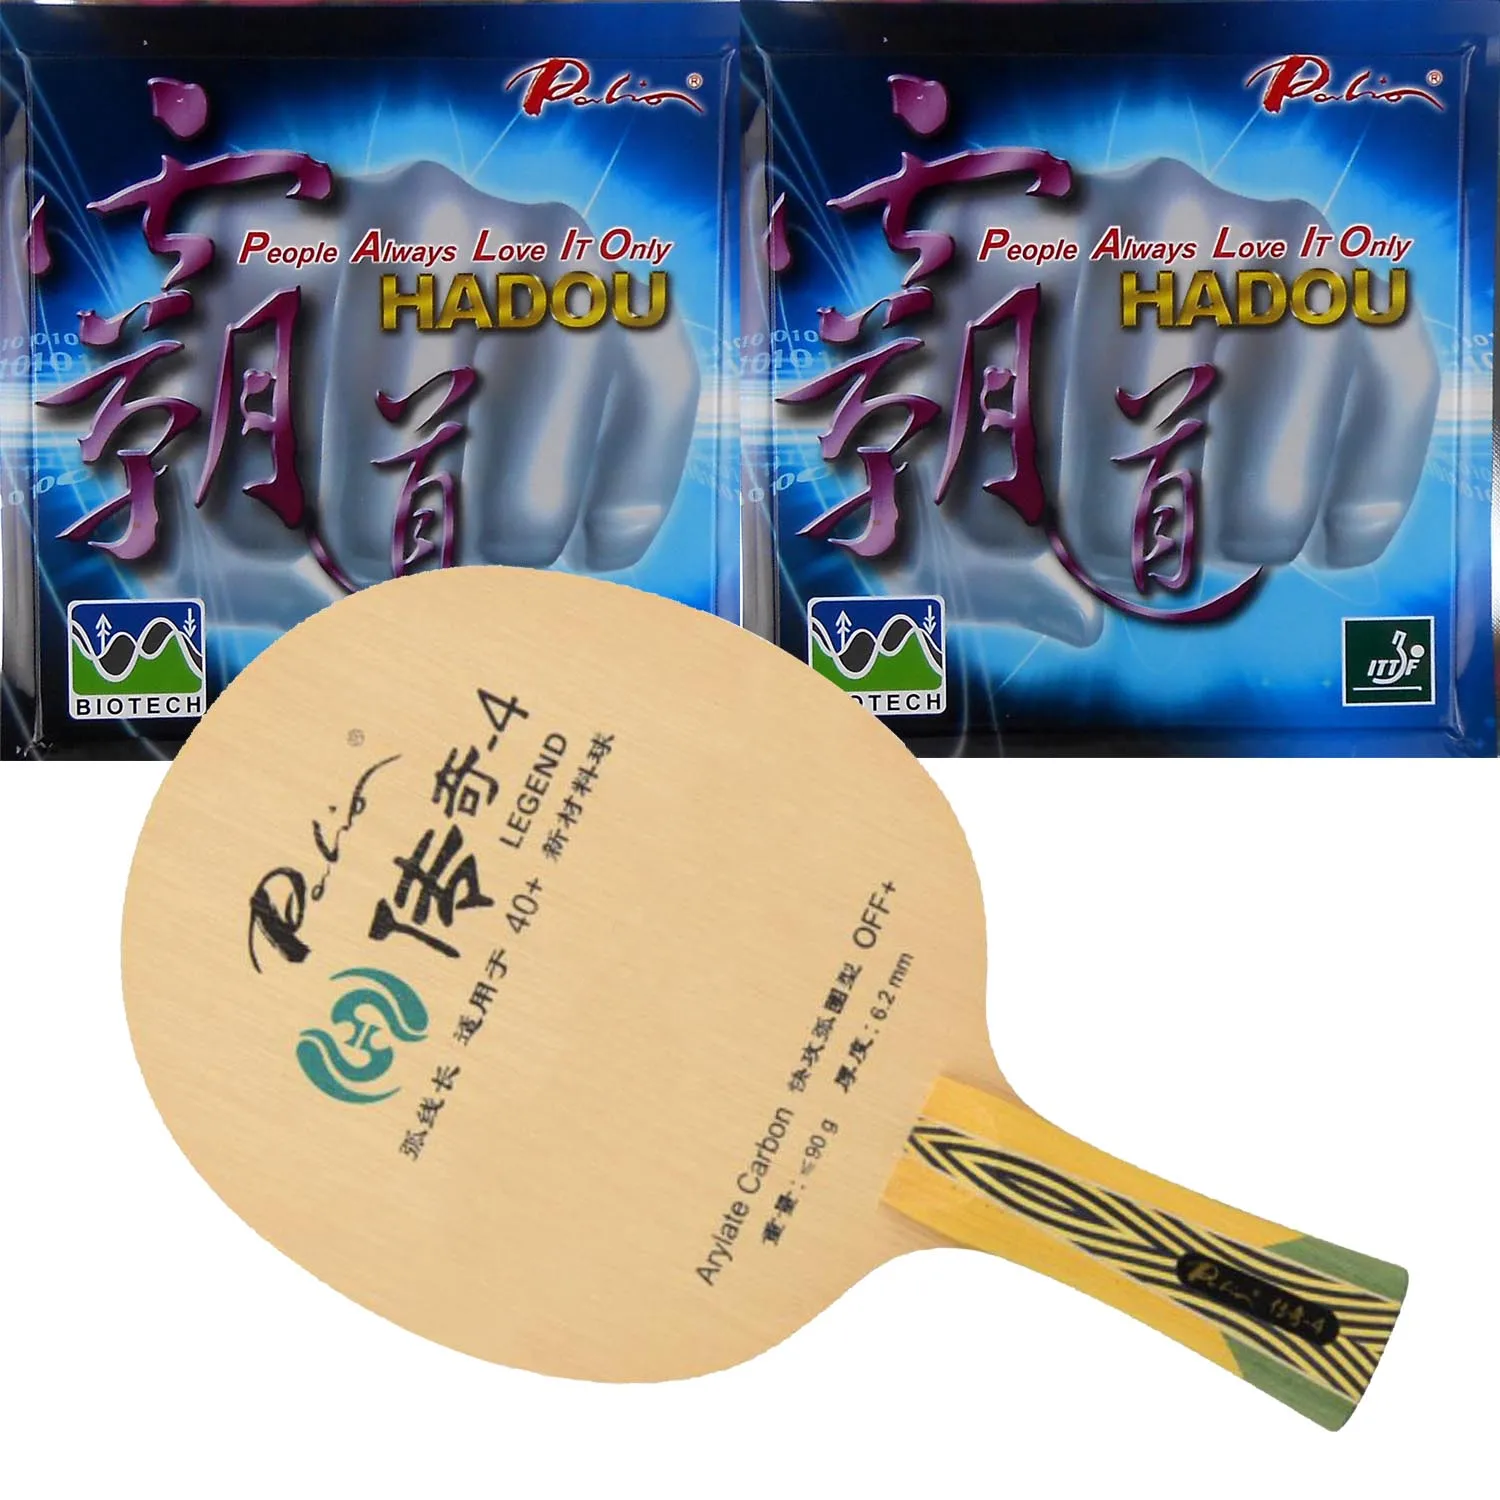 Pro Combo Racket Palio legend 4  legend 04 table tennis balde with 2Pieces Palio HADOU BIOTECH Pips-in PingPong Rubber